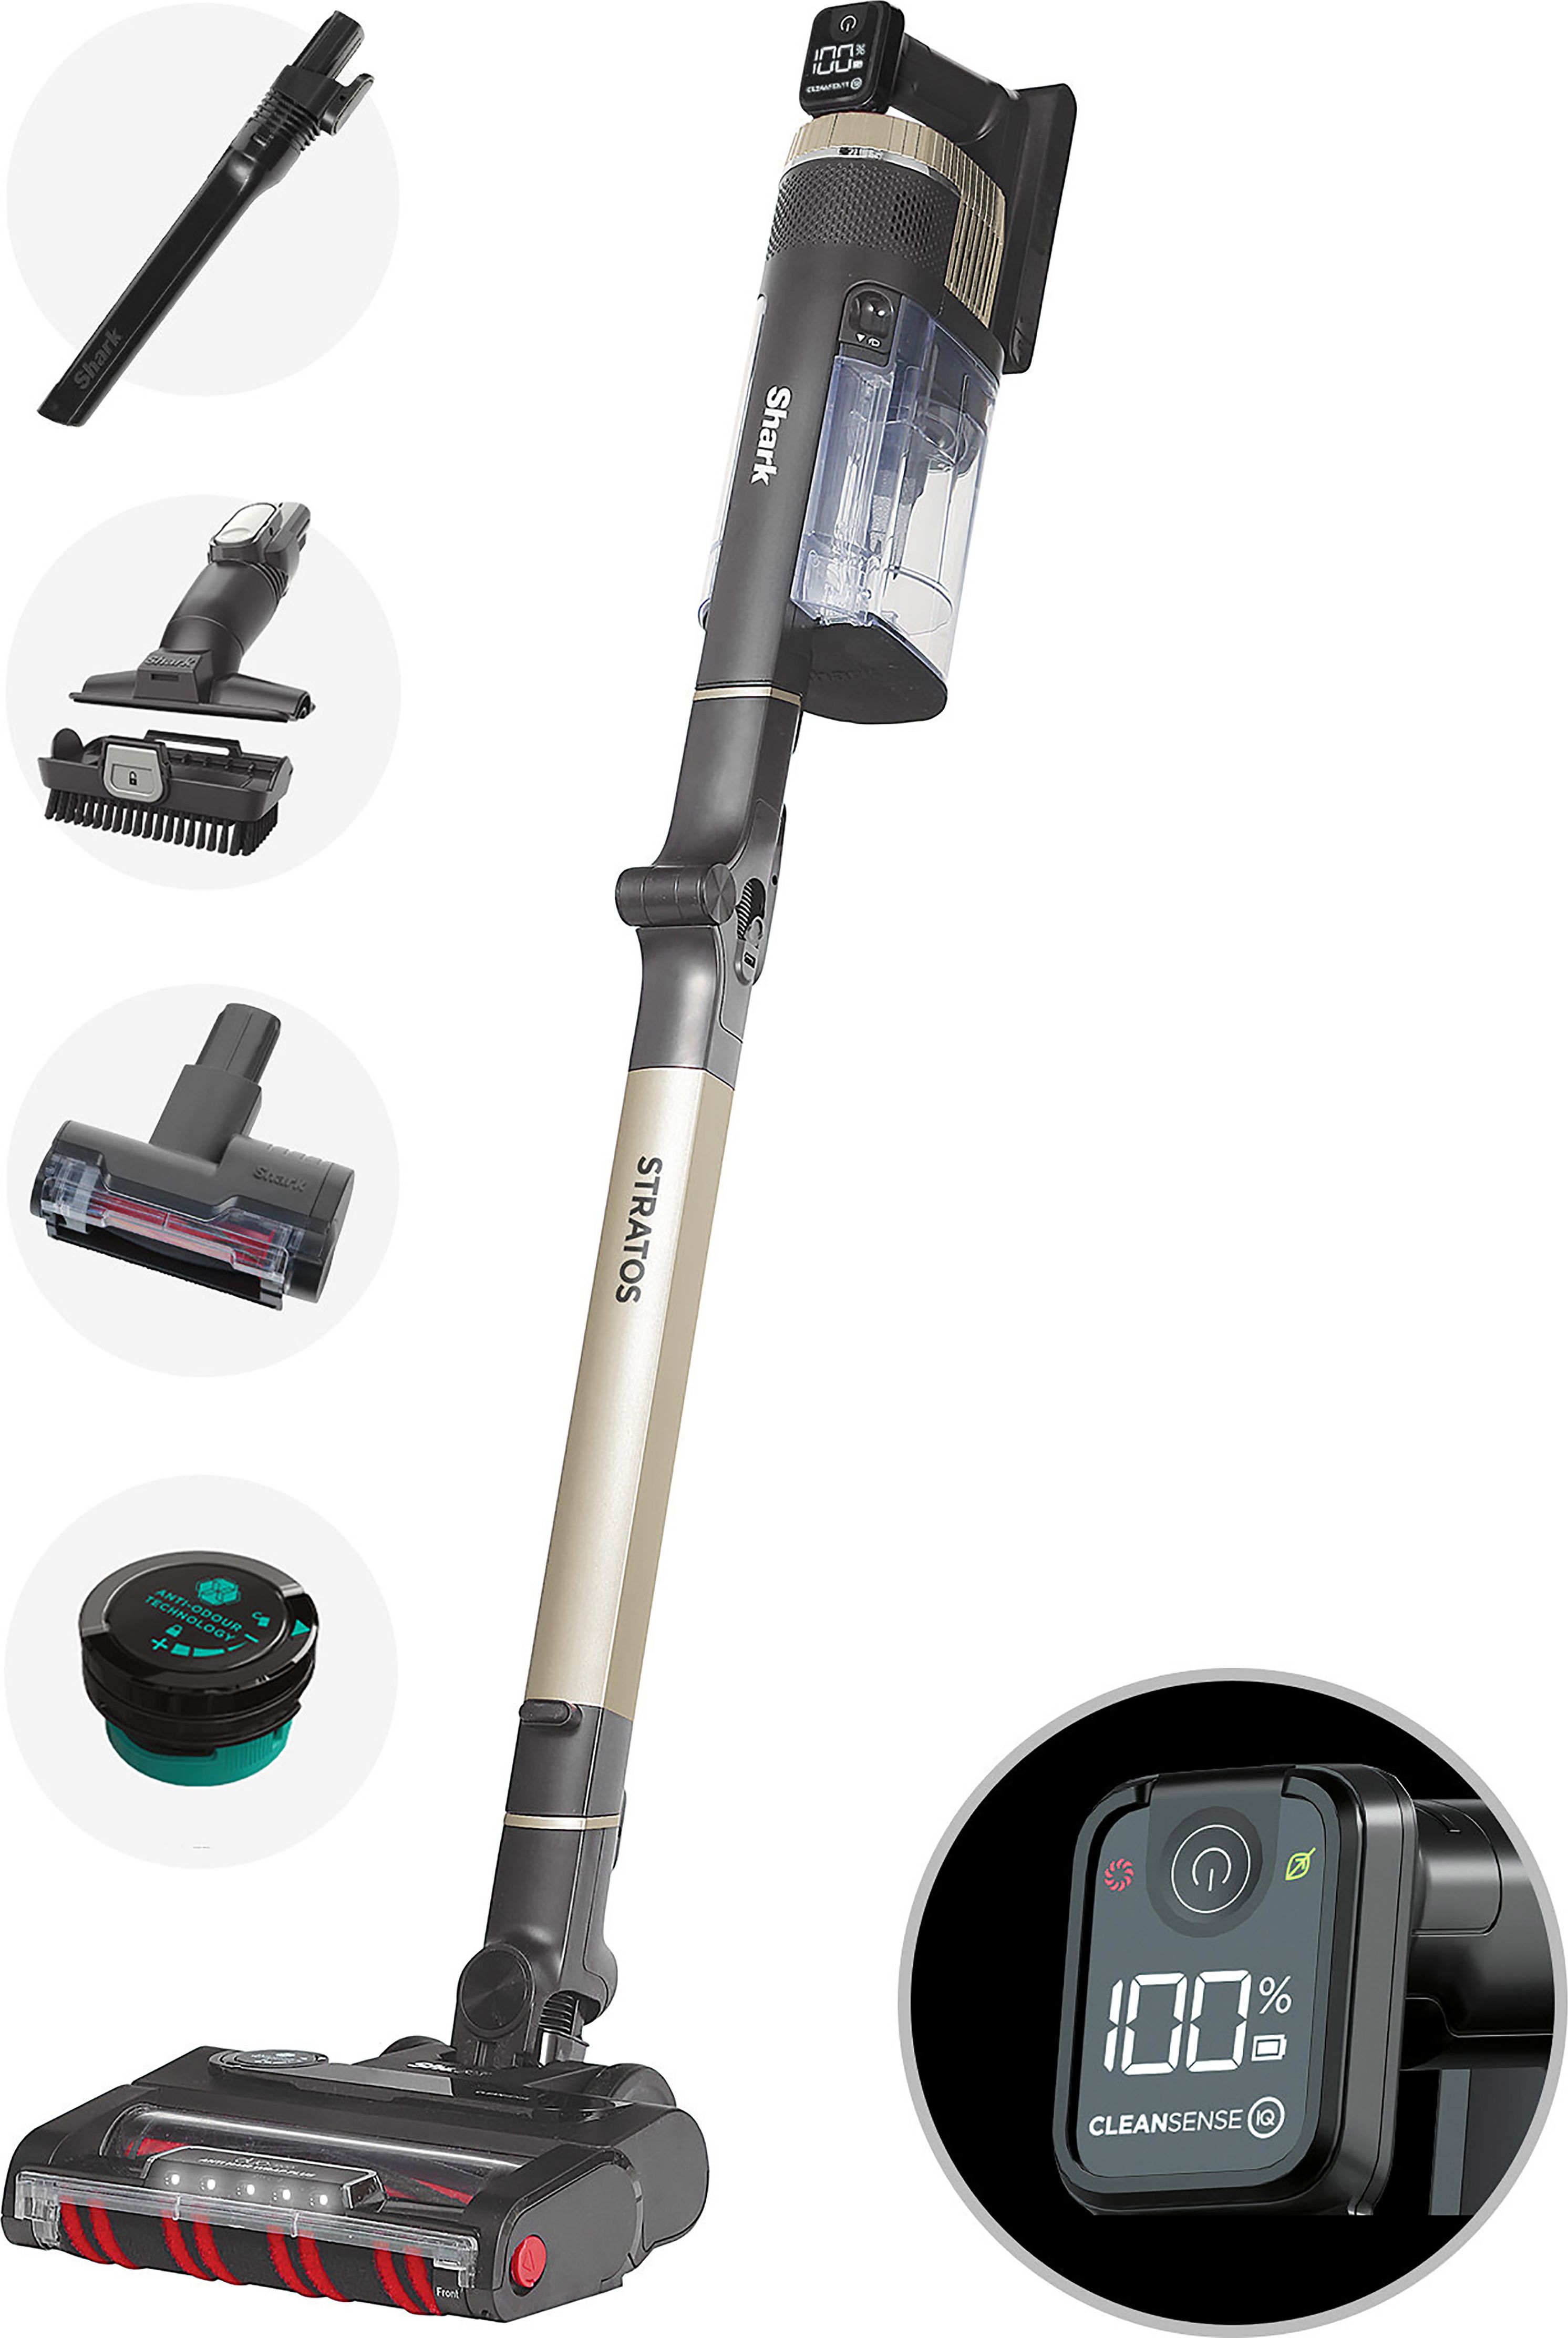 Shark Stratos with Anti-Hair Wrap Plus & Clean Sense IQ IZ400UKT Cordless Vacuum Cleaner with up to 60 Minutes Run Time - Charcoal Grey / Copper, Charcoal Grey / Copper